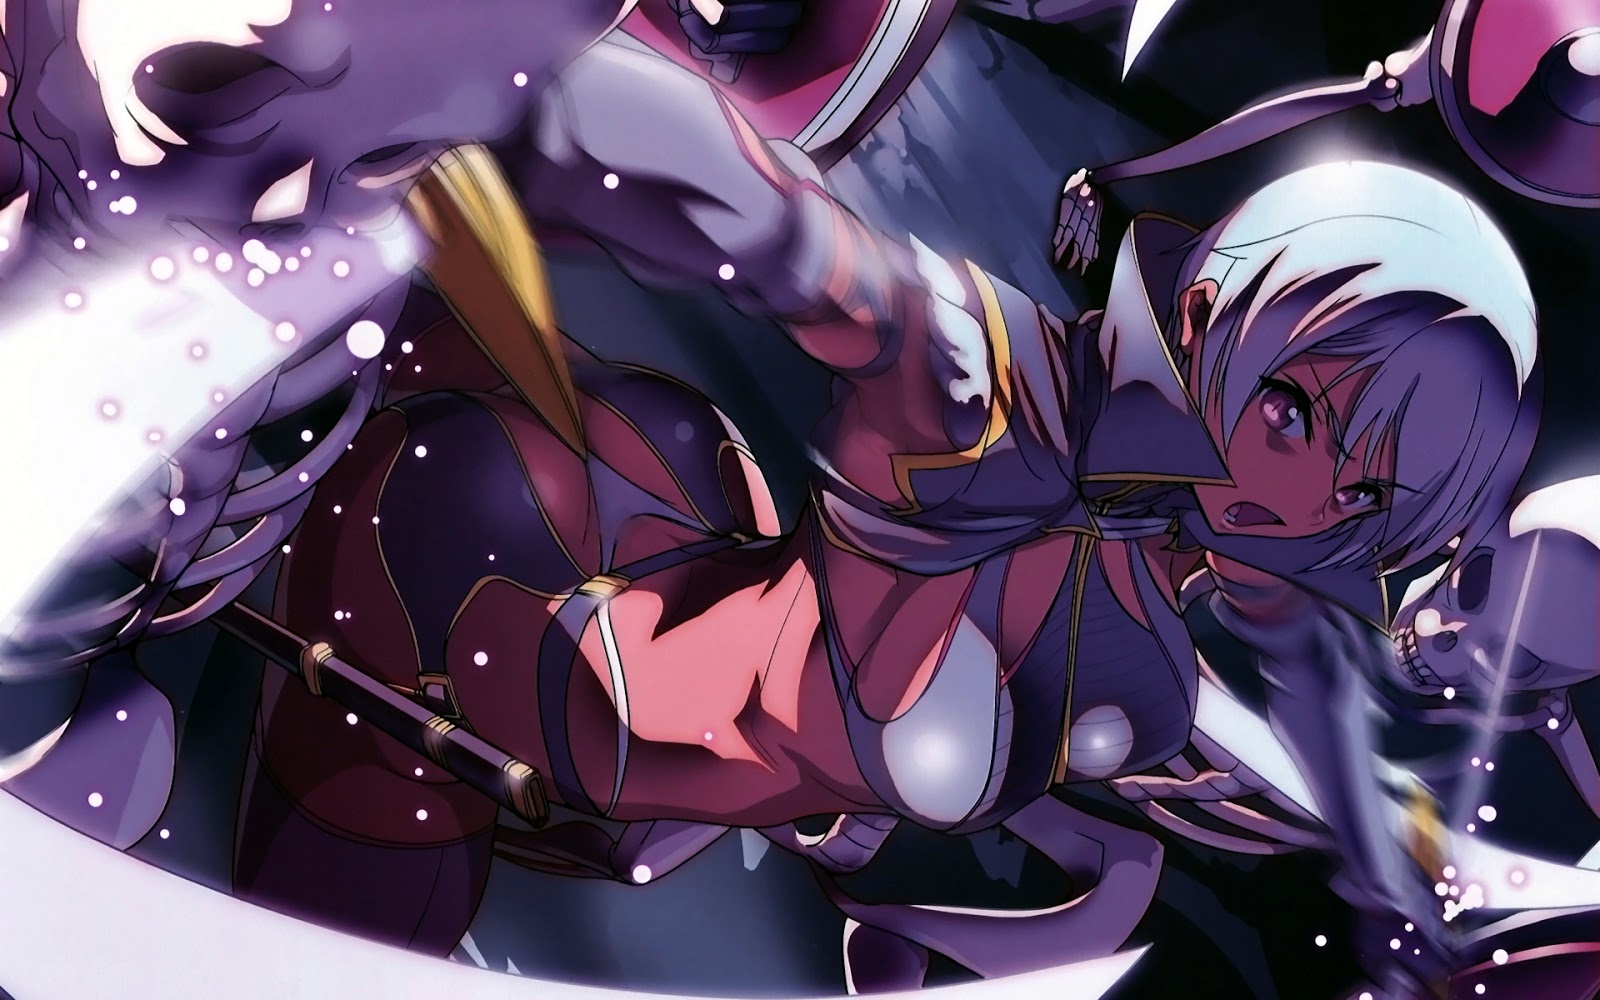 Download this Queens Blade Anime Fighting Girl Wallpaper Desktop Background picture